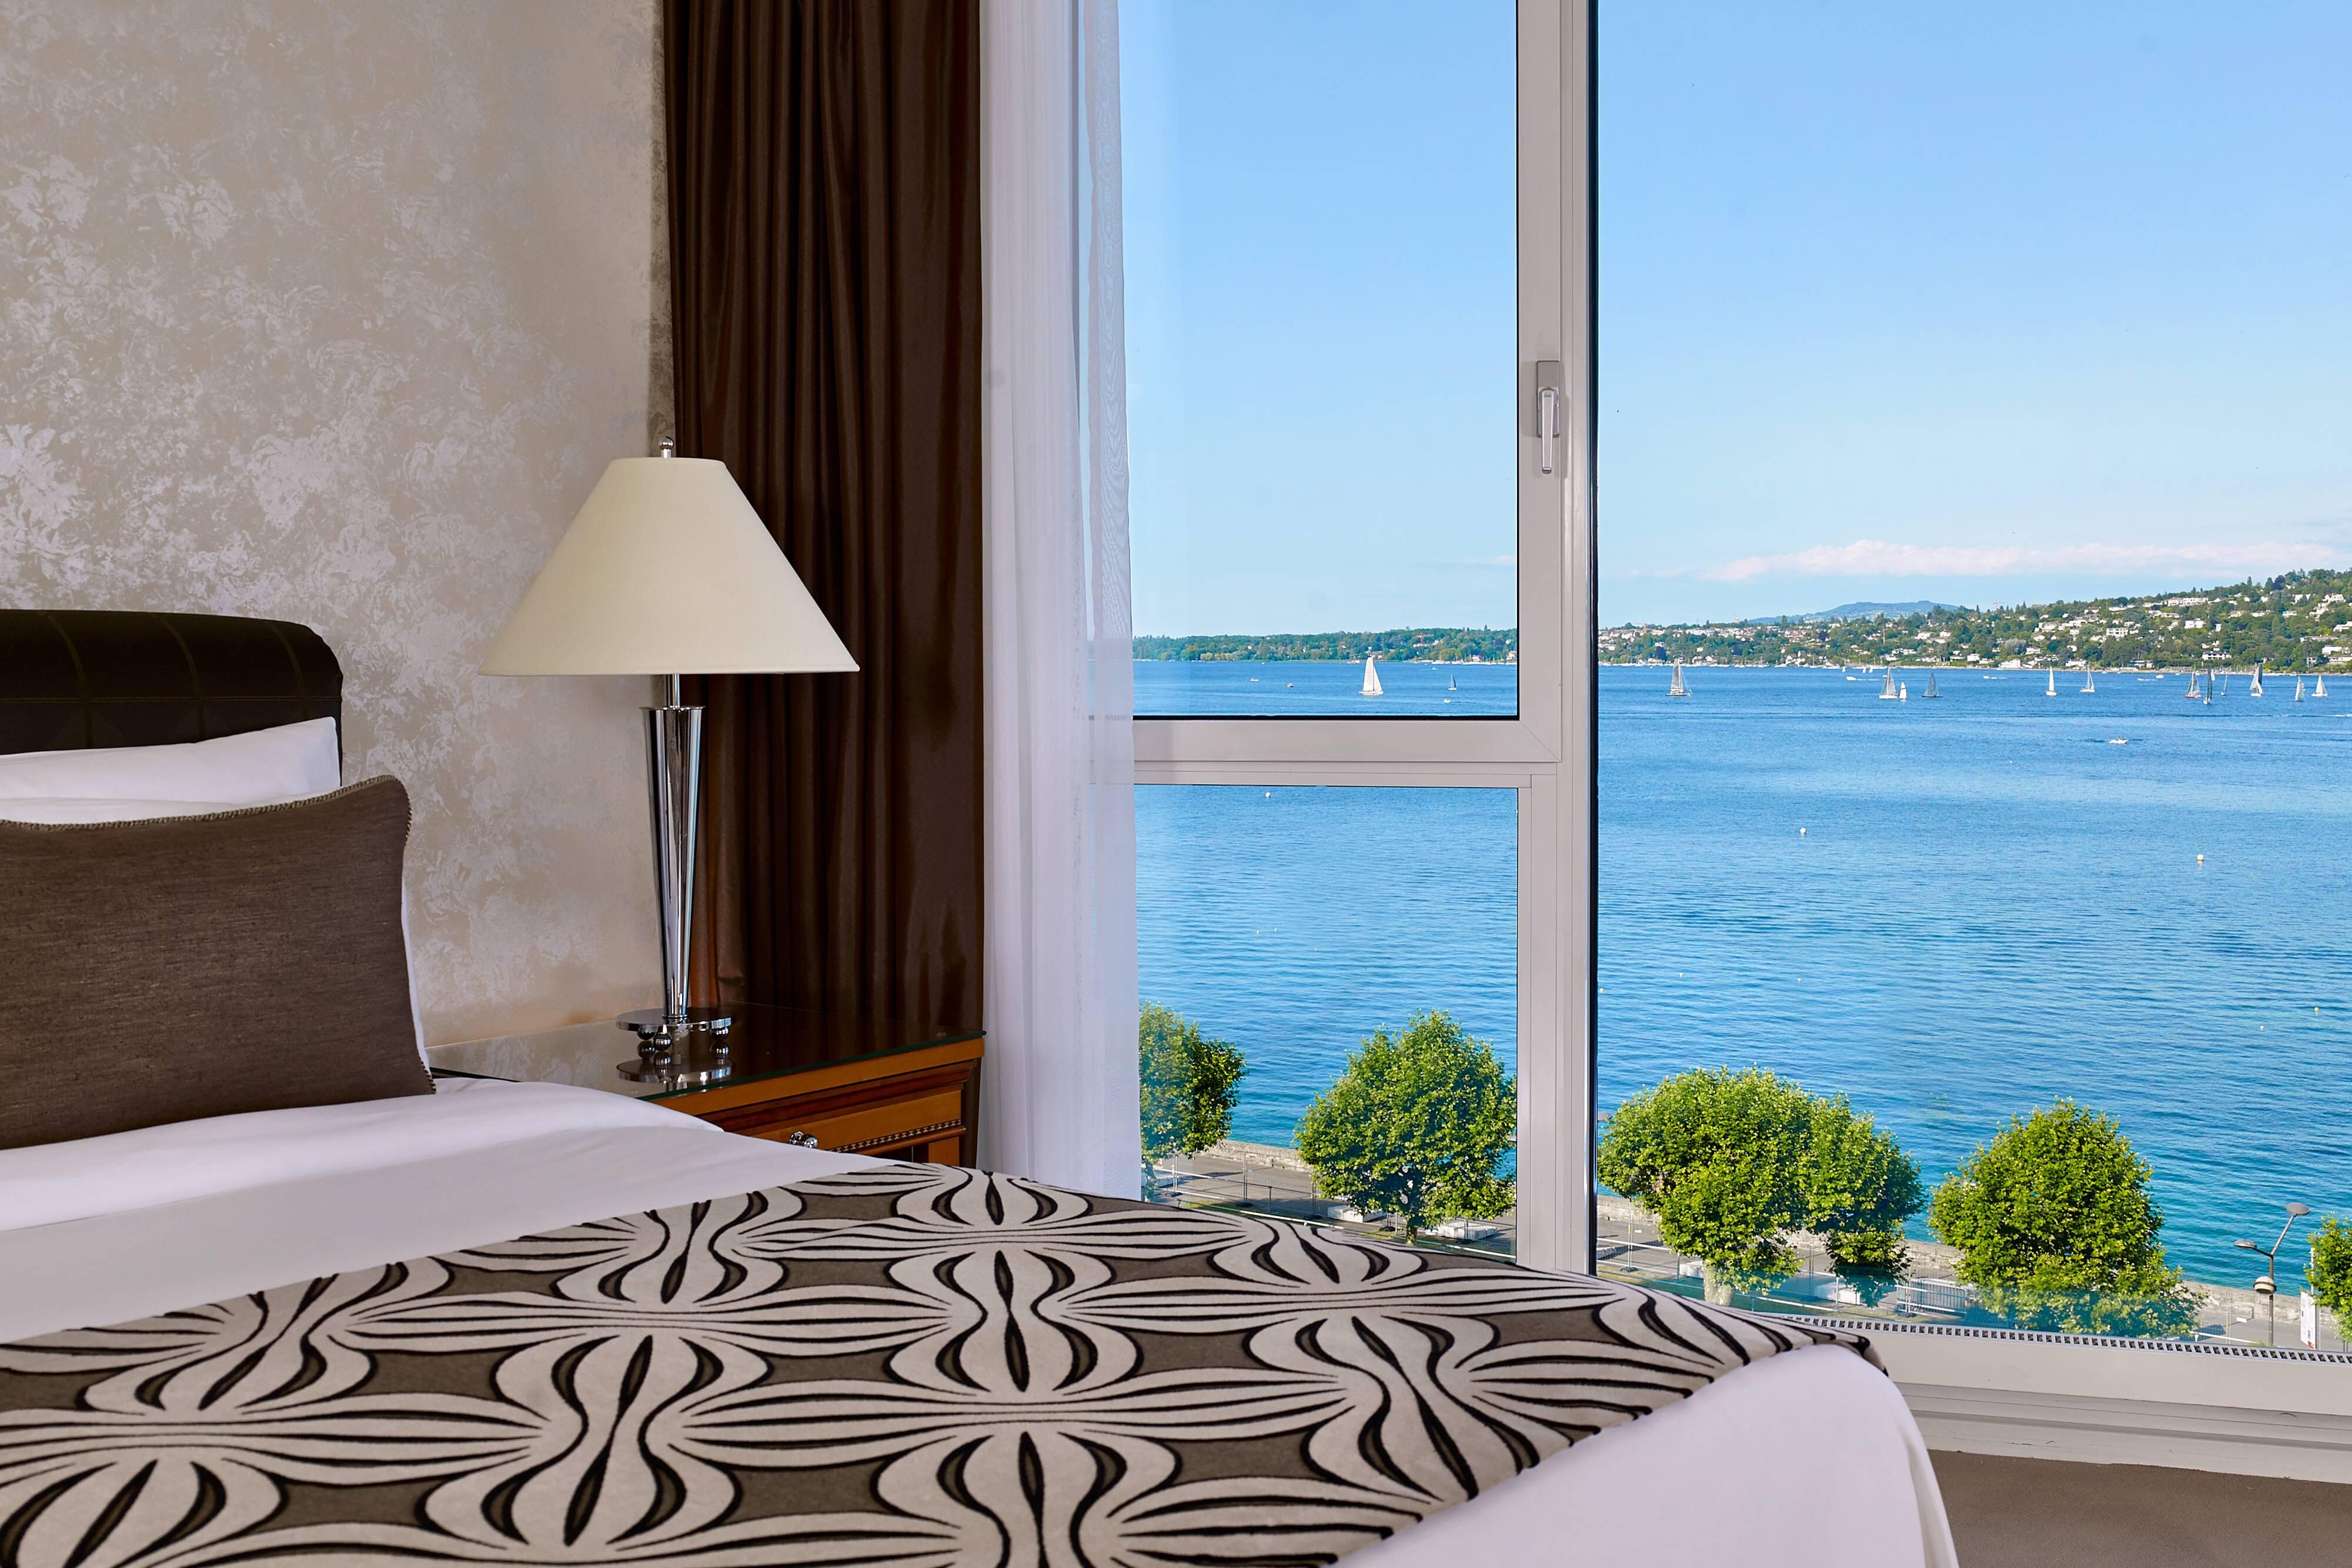 Junior Suite - Bedroom with lake View